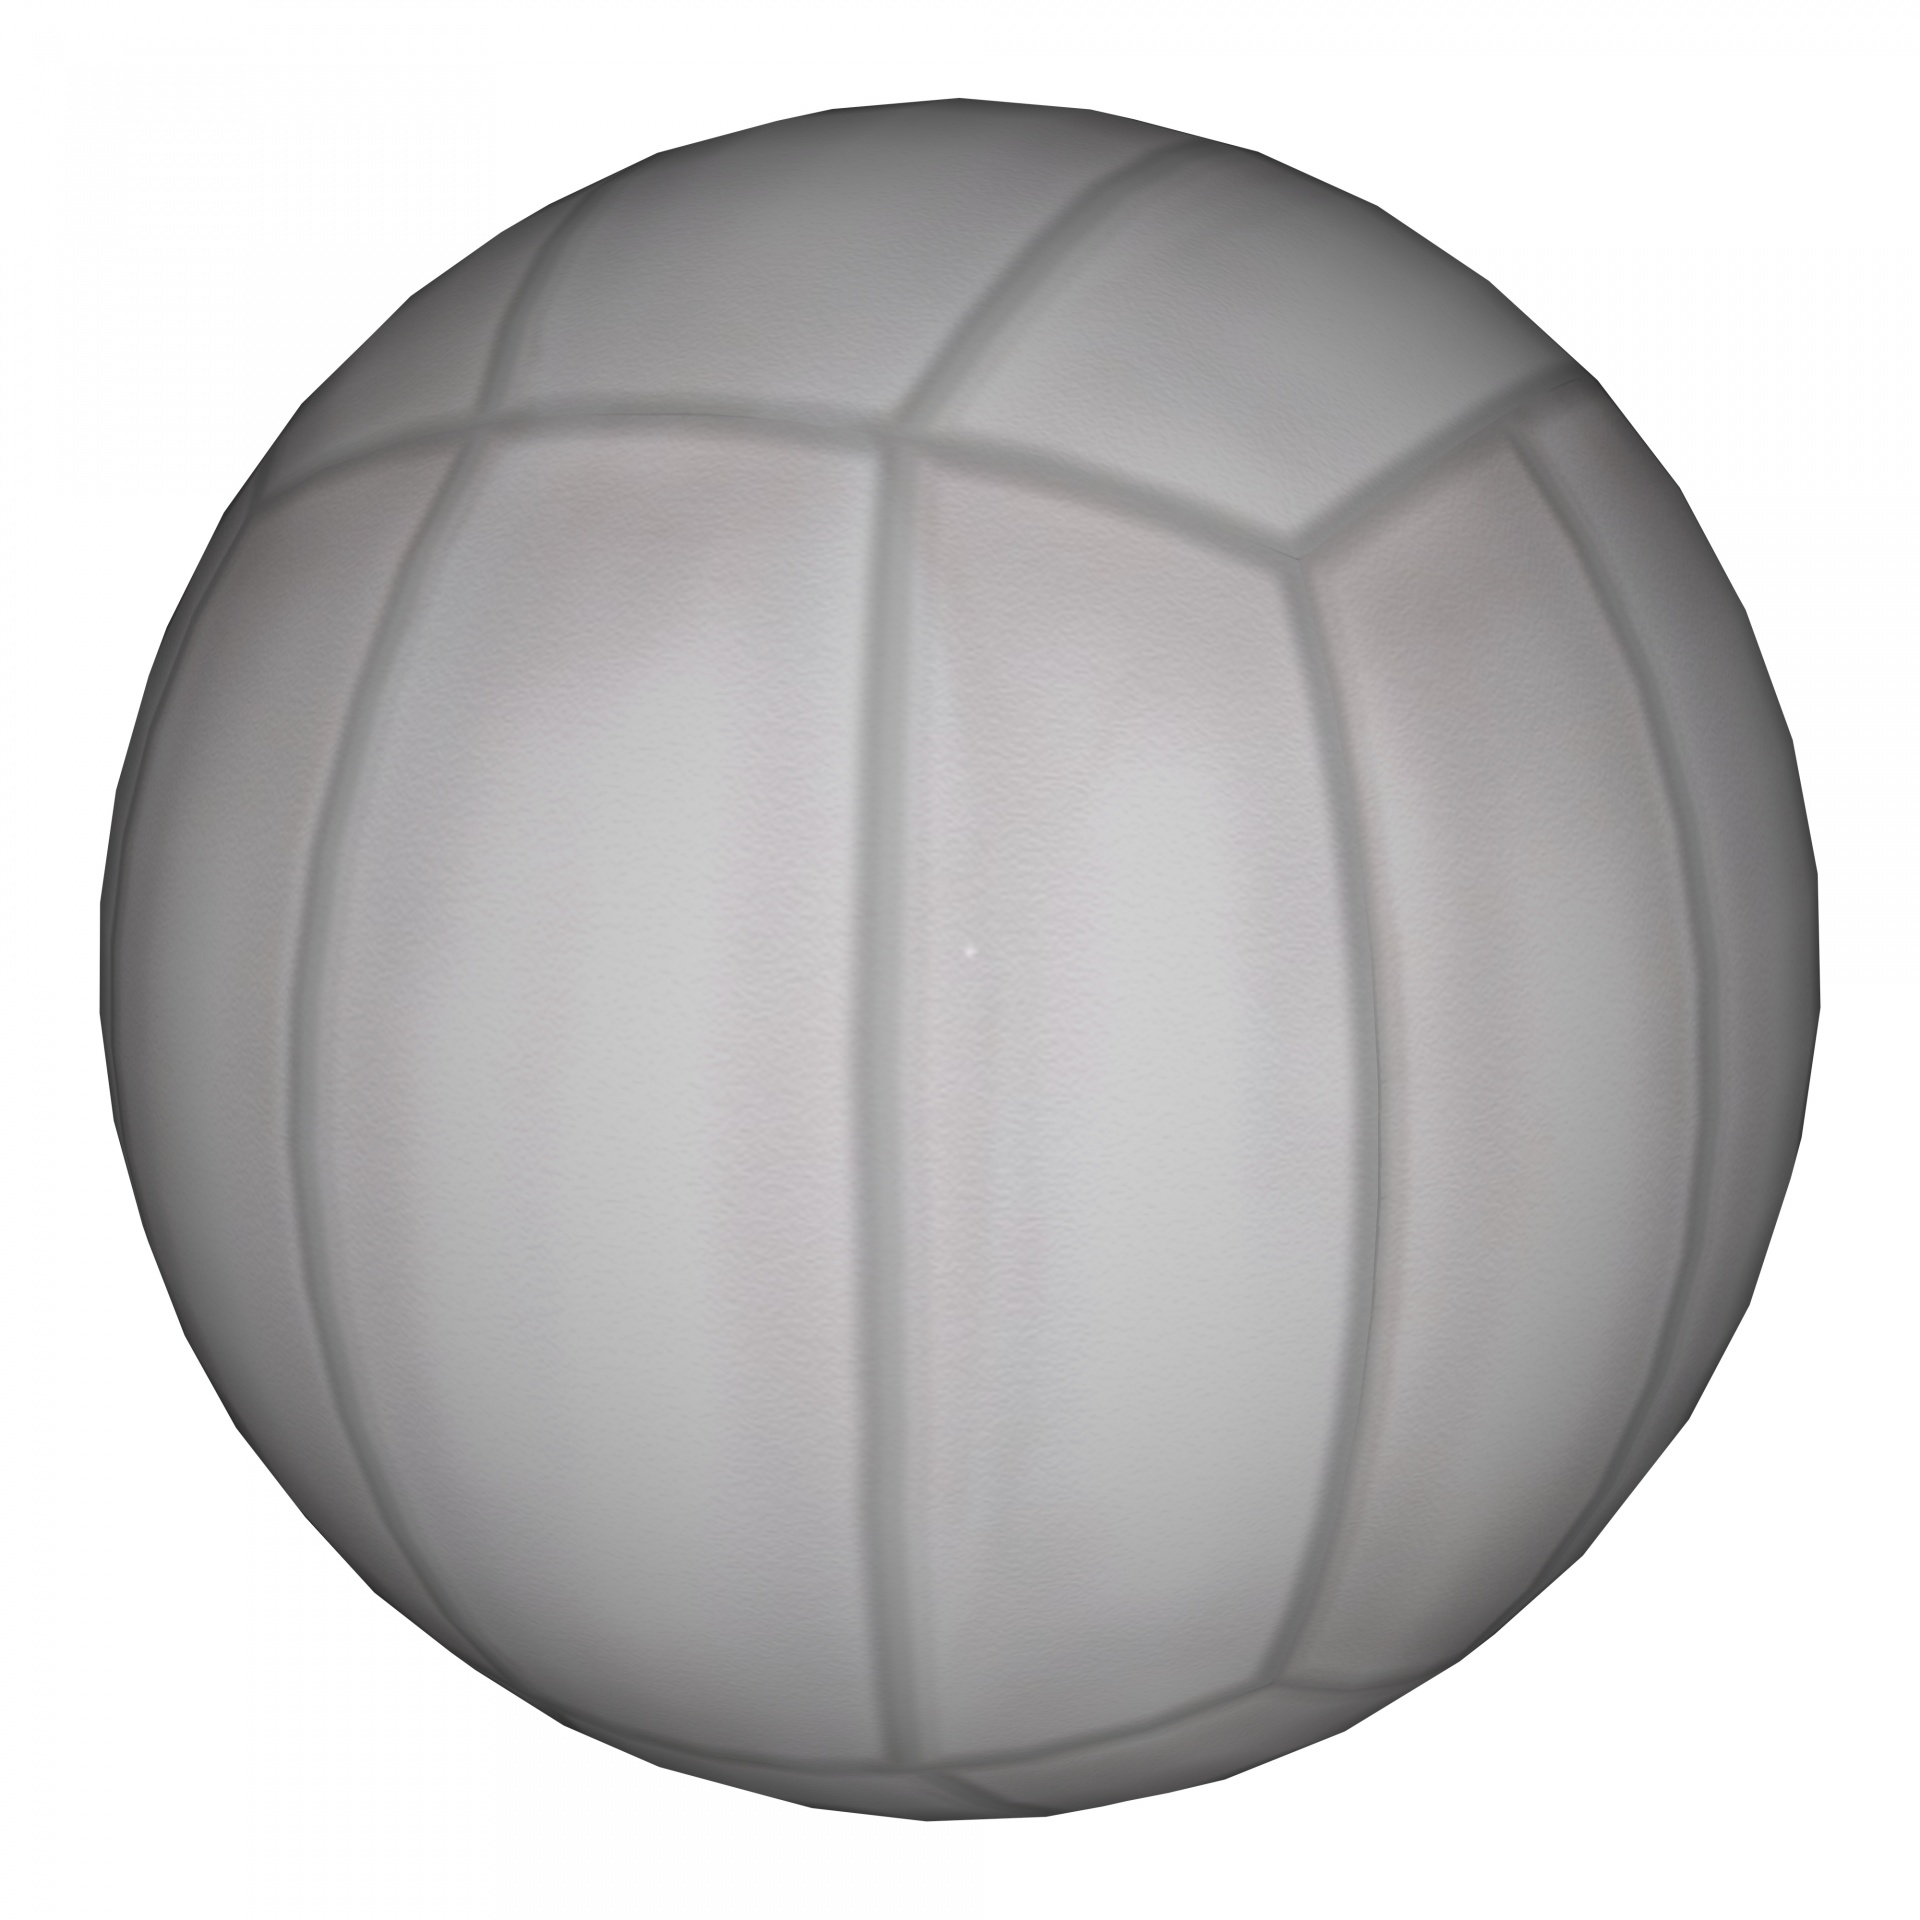 volleyball ball 3d free photo